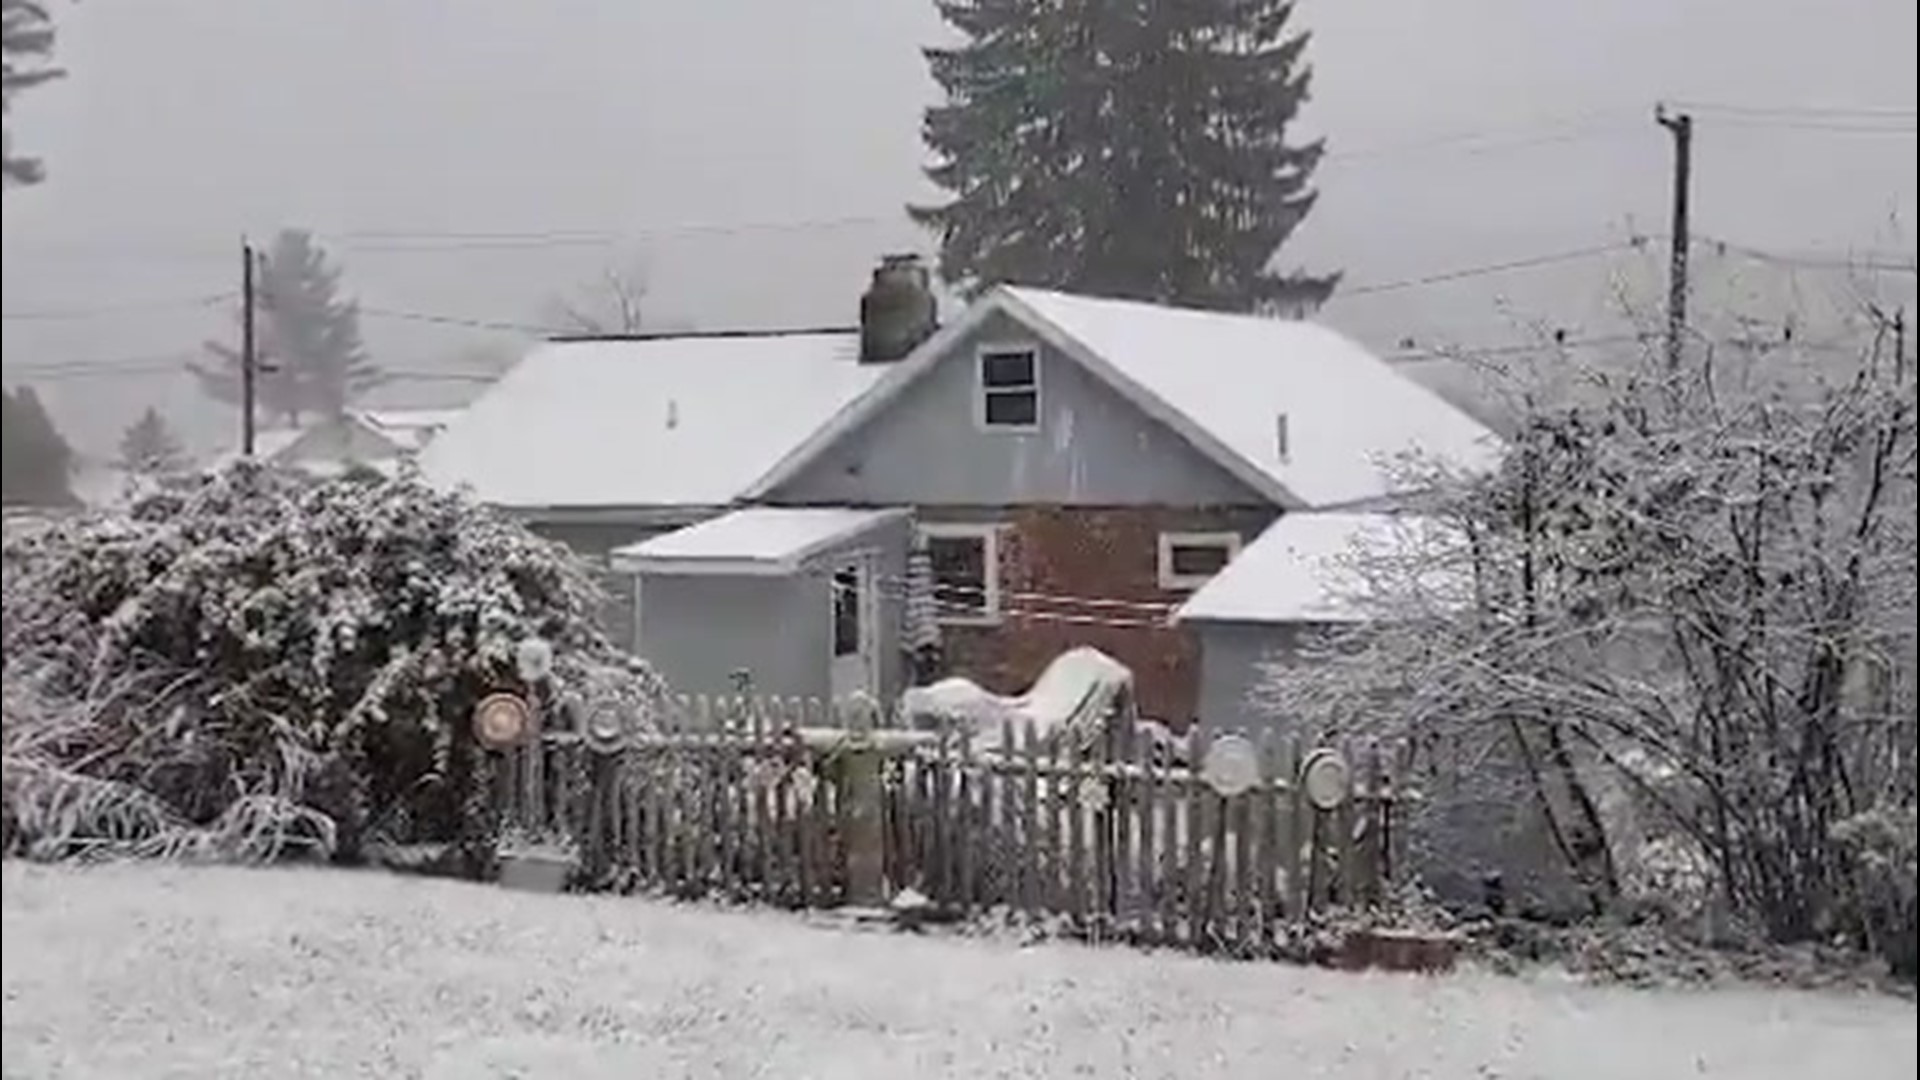 Staffordville, Connecticut, was covered in snow after some heavy snowfall early Friday, Oct. 30.